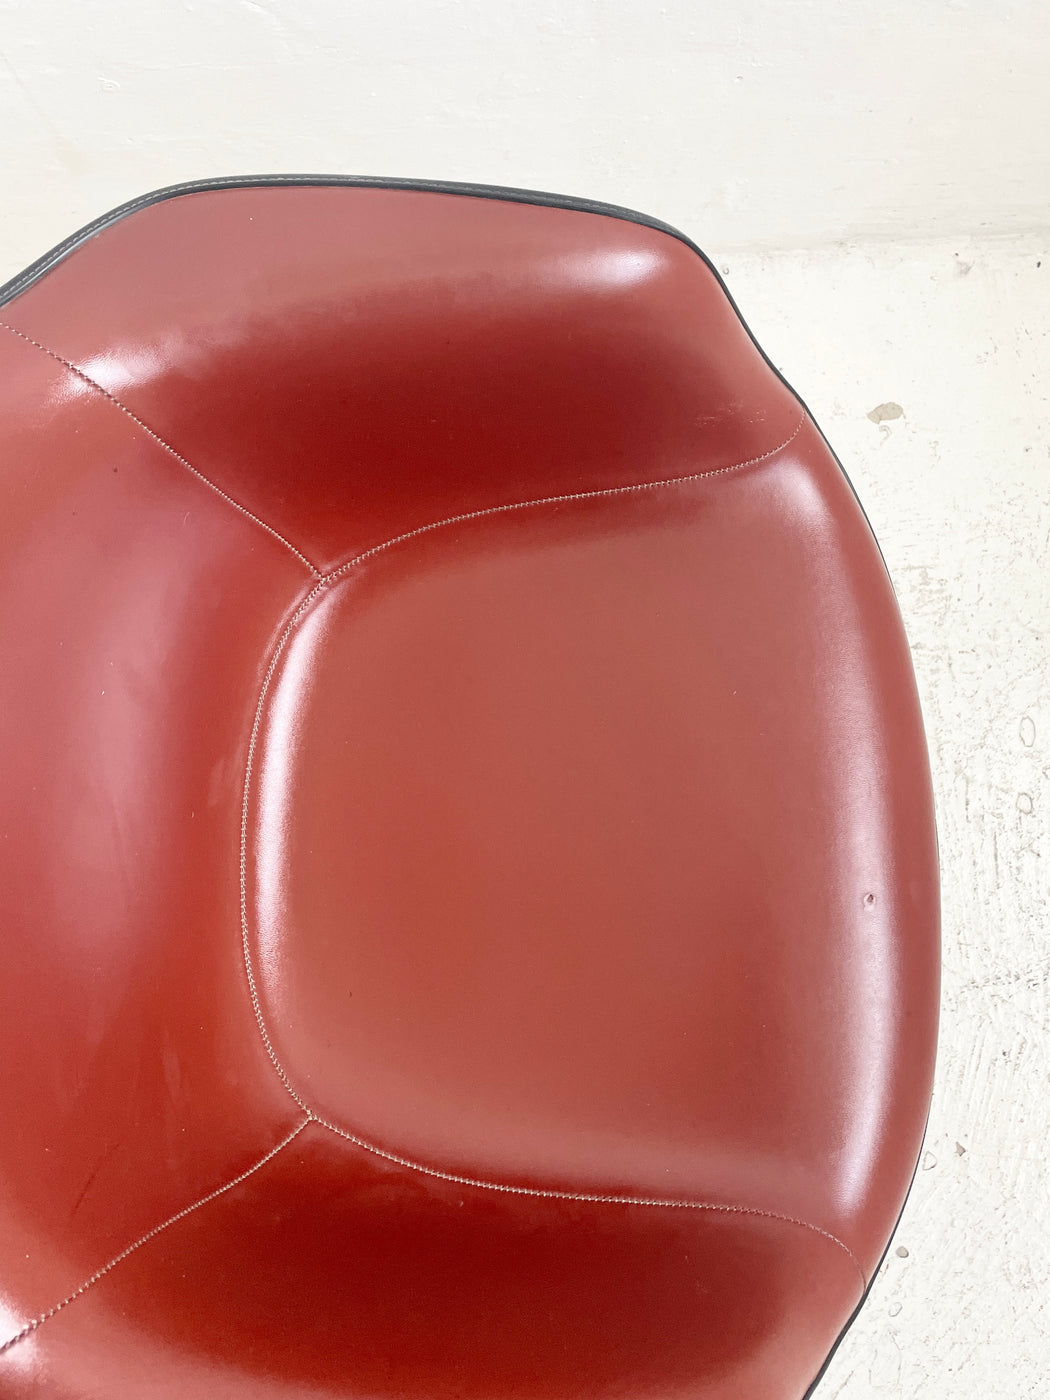 Charles & Ray Eames Shell Armchair